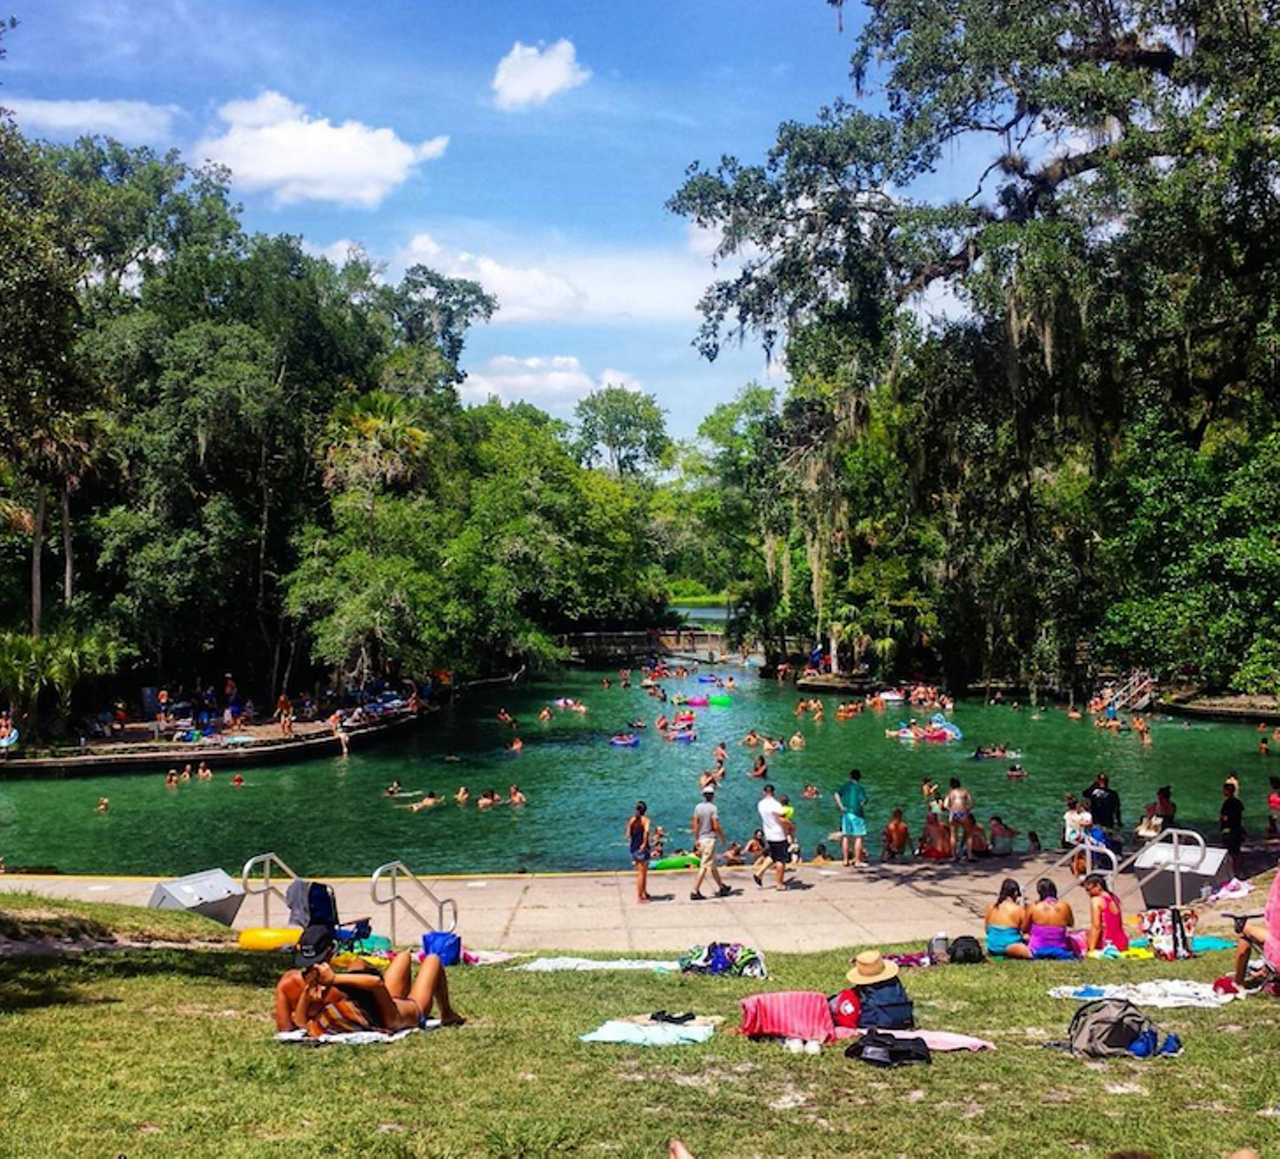 Wekiwa Springs
Estimated driving distance from Orlando: 30 min
Near Orlando, this park is a favorite among locals not just for its proximity. From birding to fishing and snorkeling to equestrian trails, there are loads of activities to do here. Camping is available for $5 per person...except if you bring your own horse.
Photo via ad_line_/Instagram